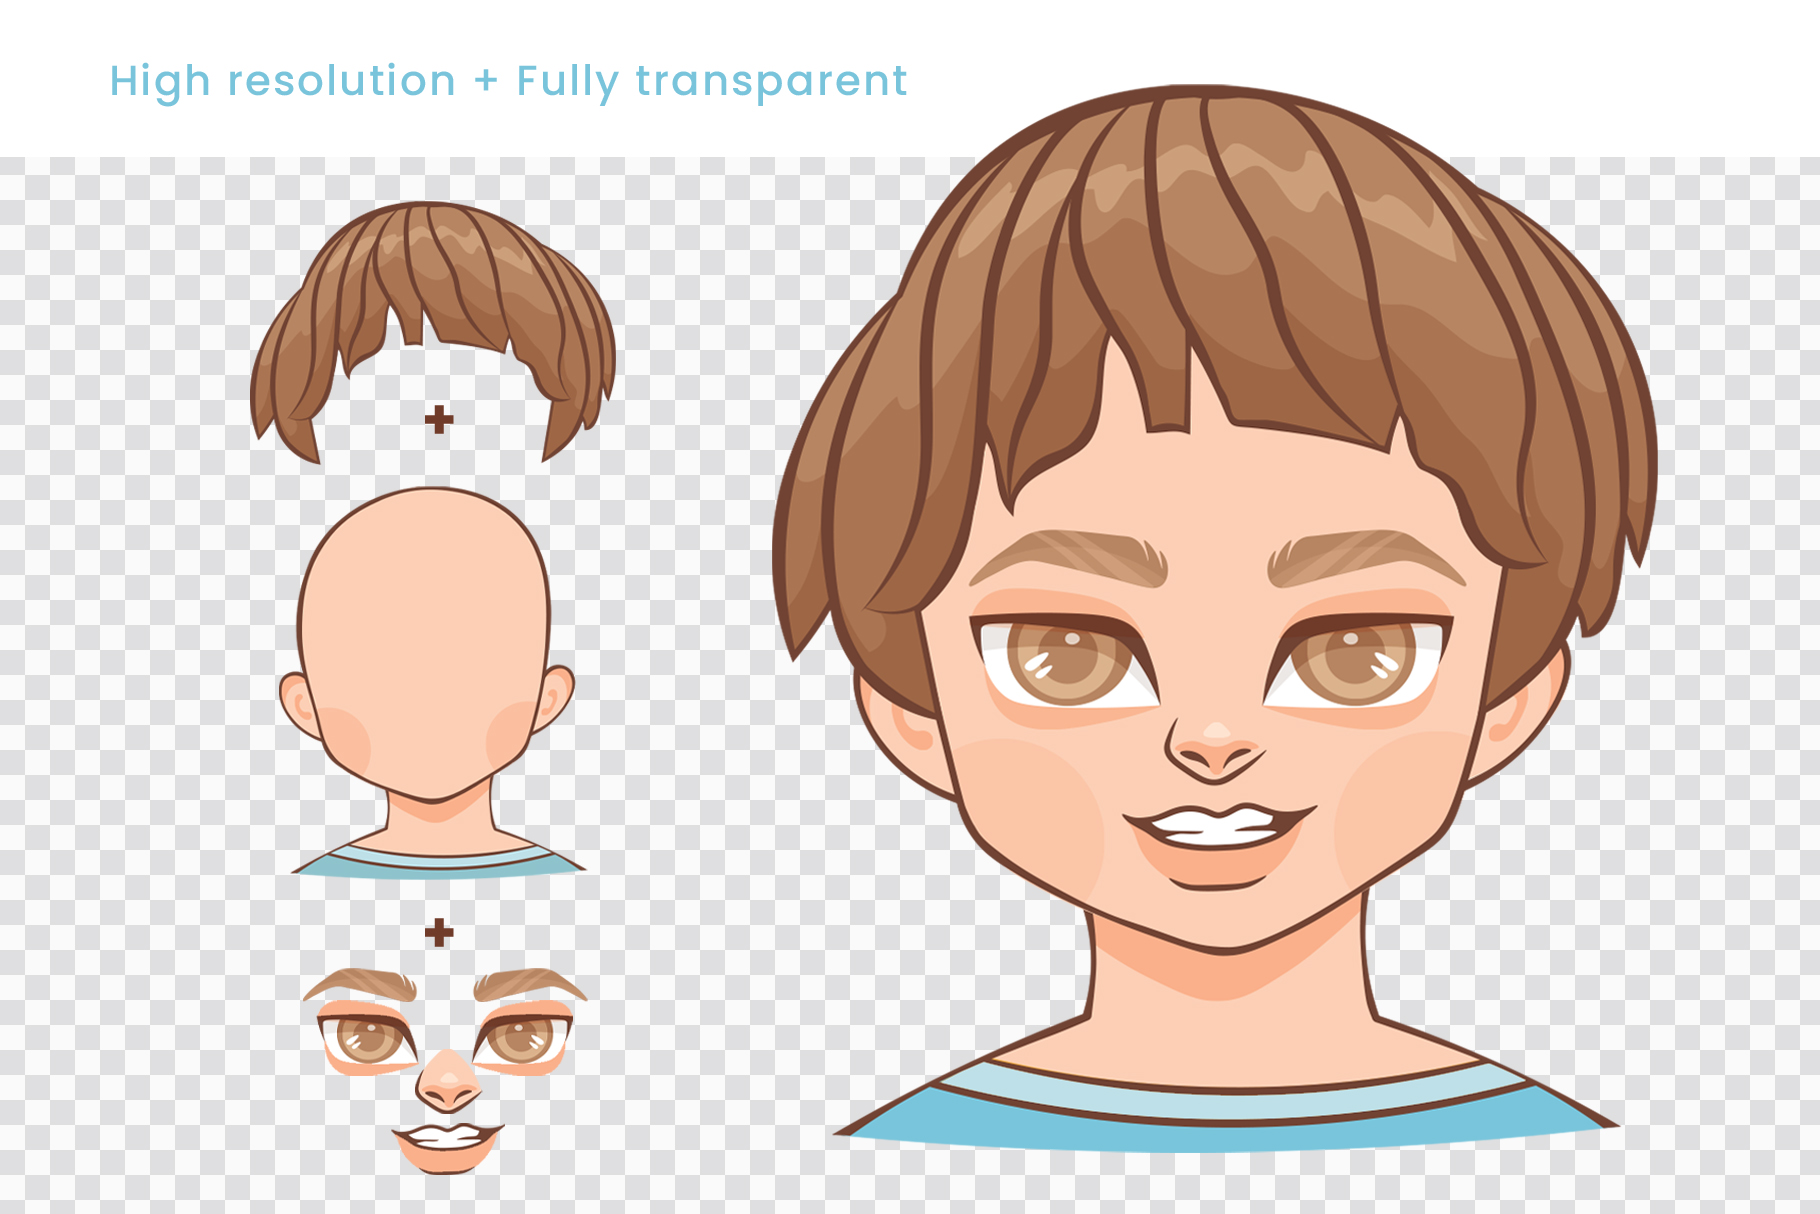 Boy Character Avatar Builder Kit (AI, EPS, PNG Format)